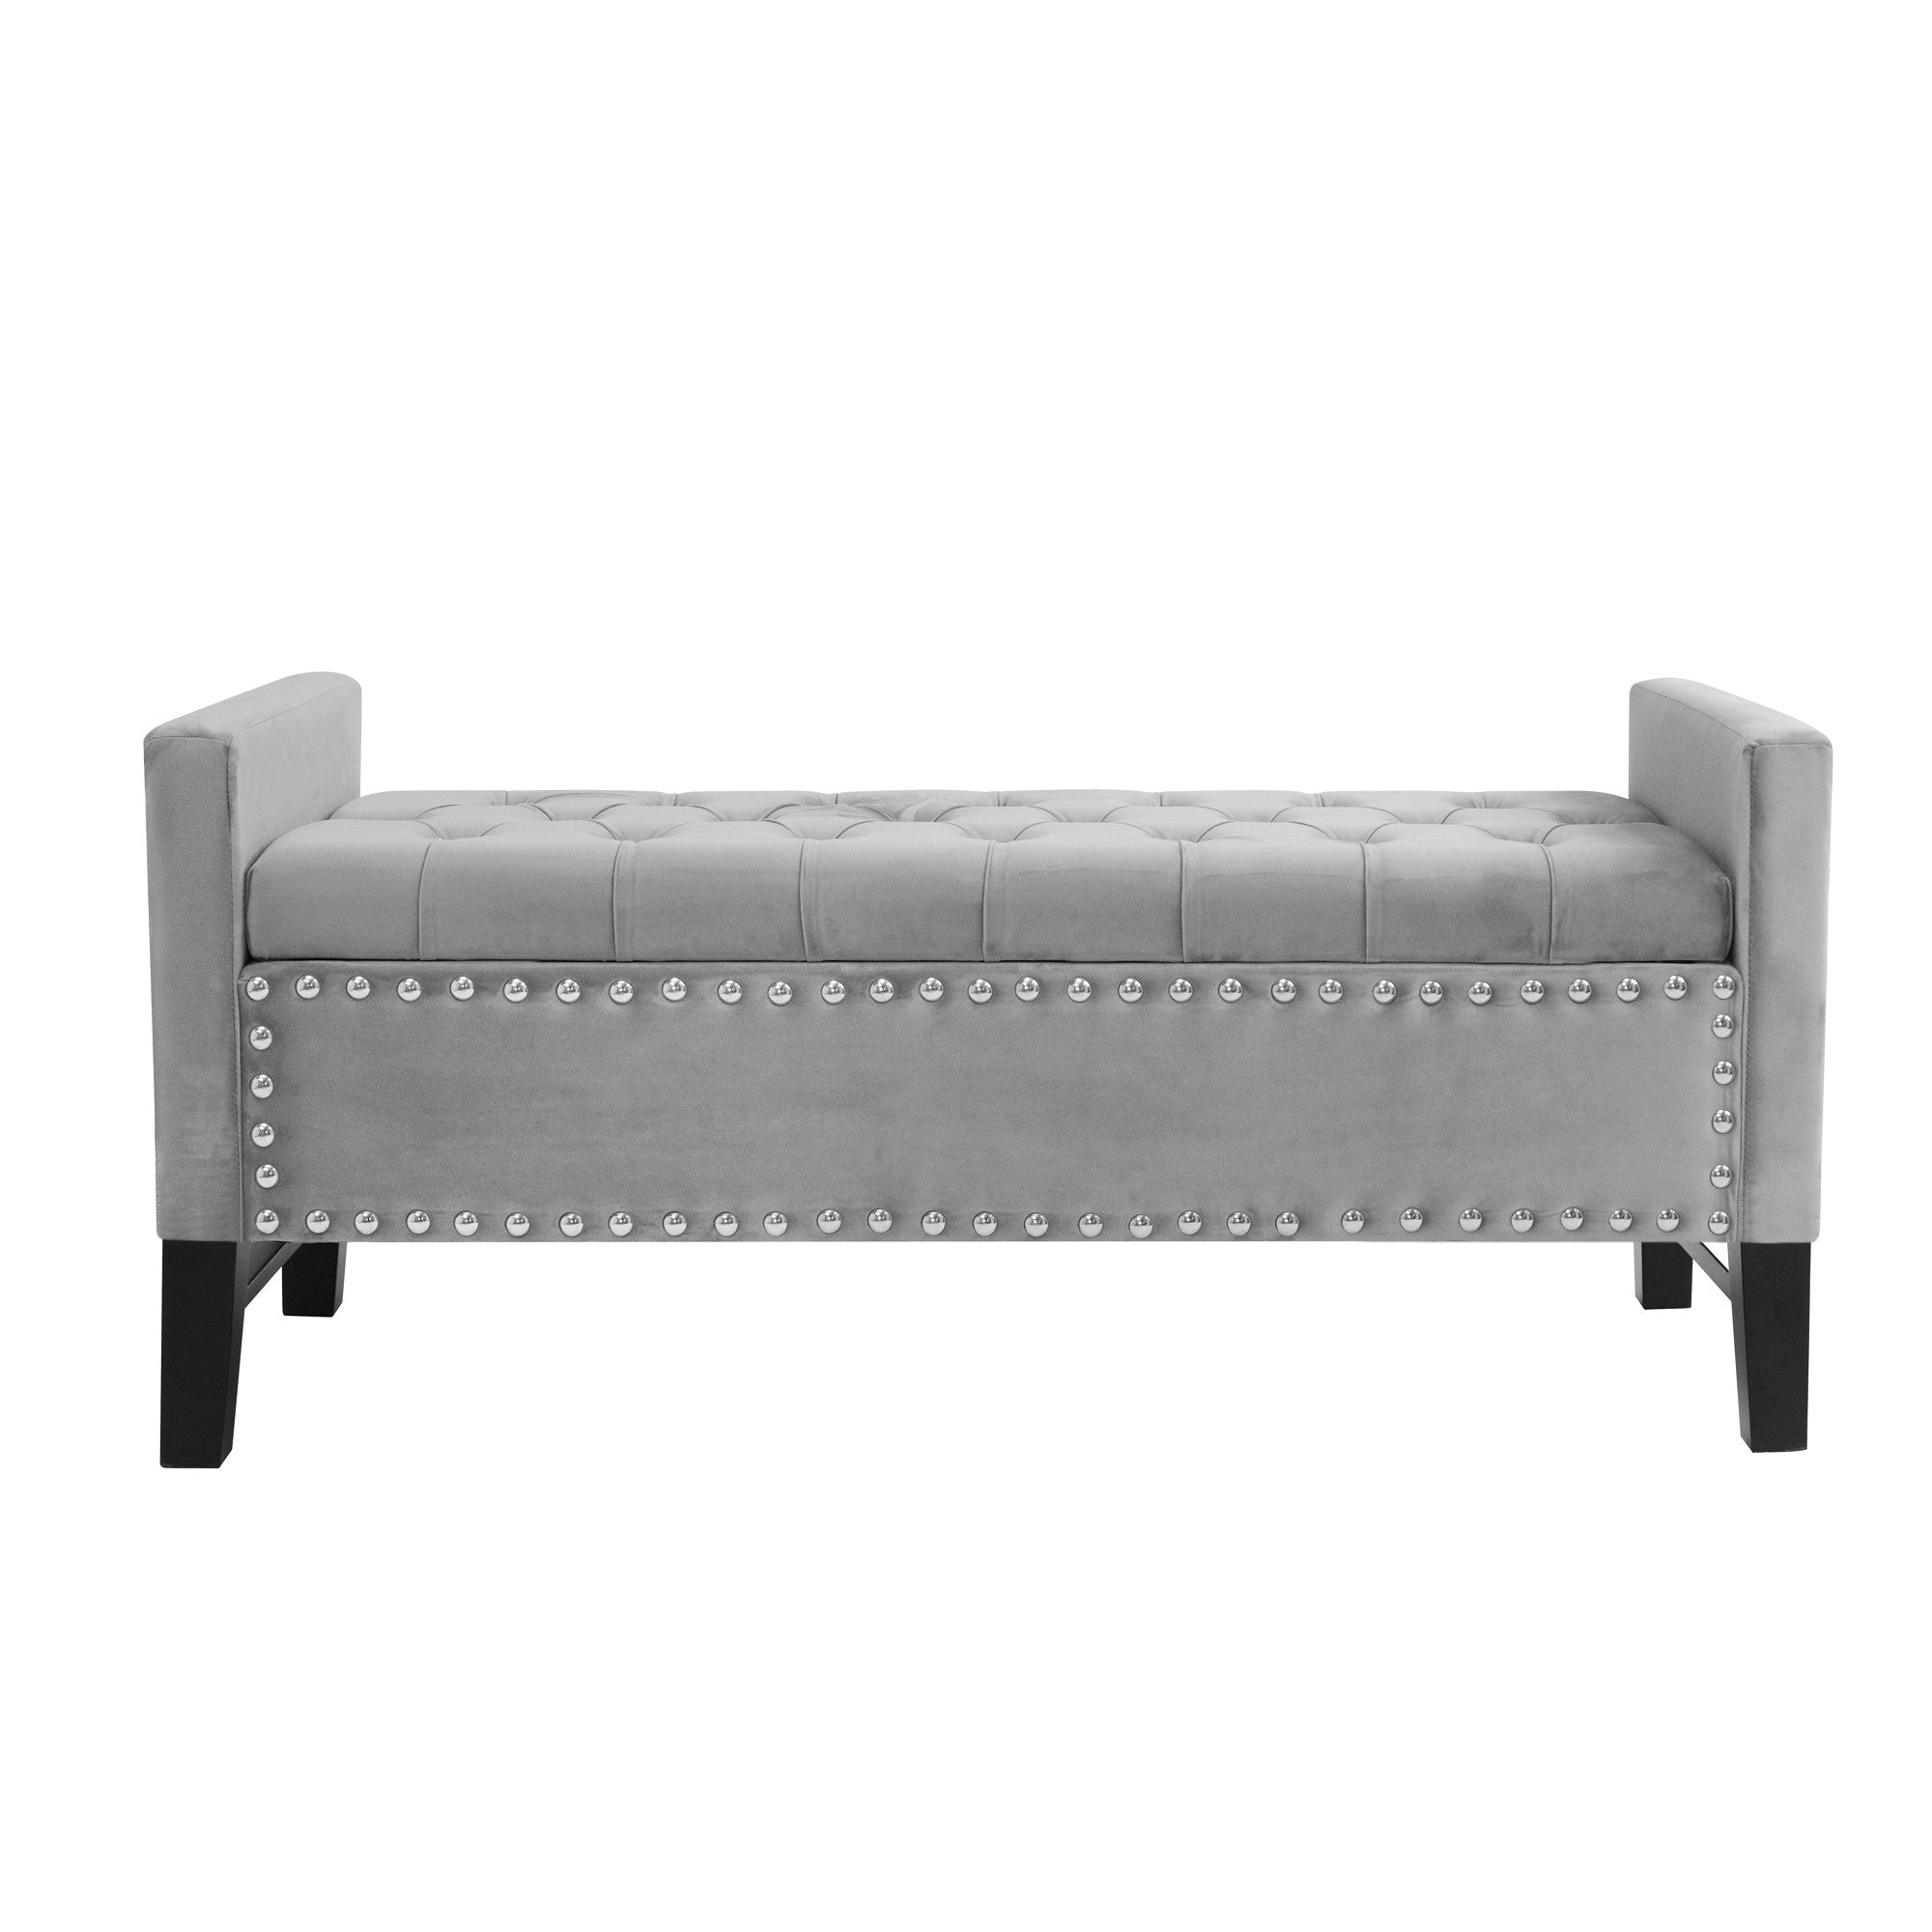 50" Espresso Upholstered PU Leather Bench with Flip top, Shoe Storage